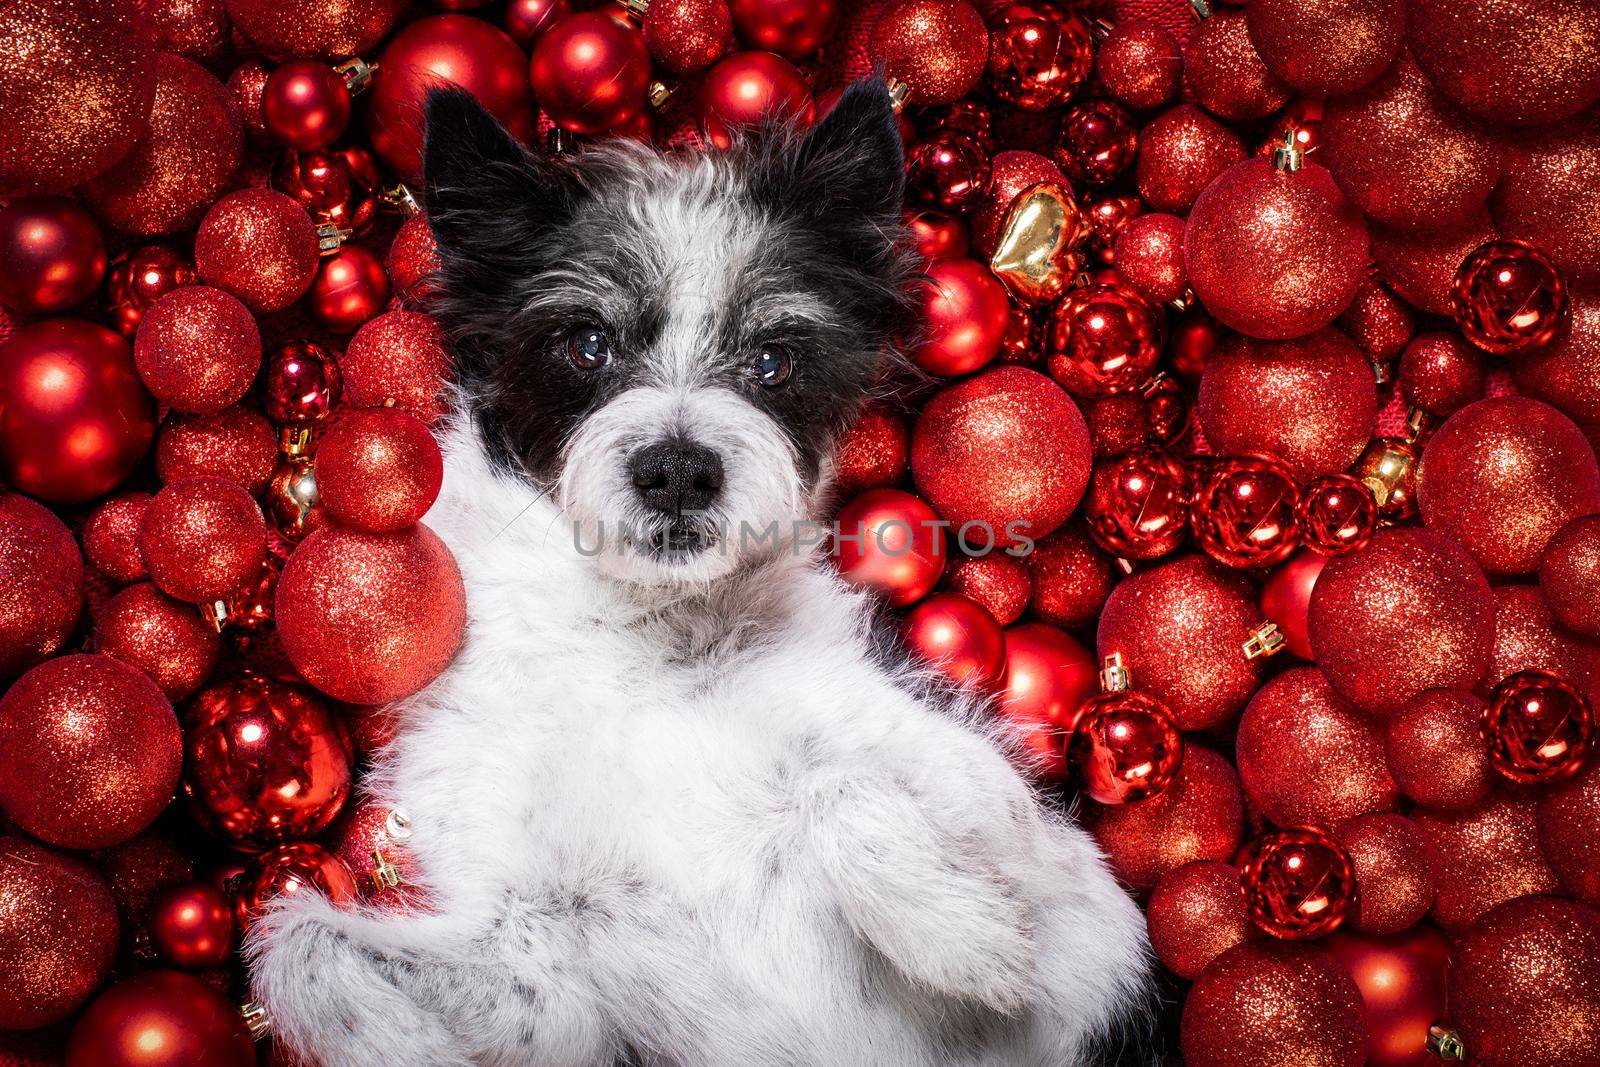 poodle  dog  as santa claus  for christmas holidays resting on a xmas balls baubles as background